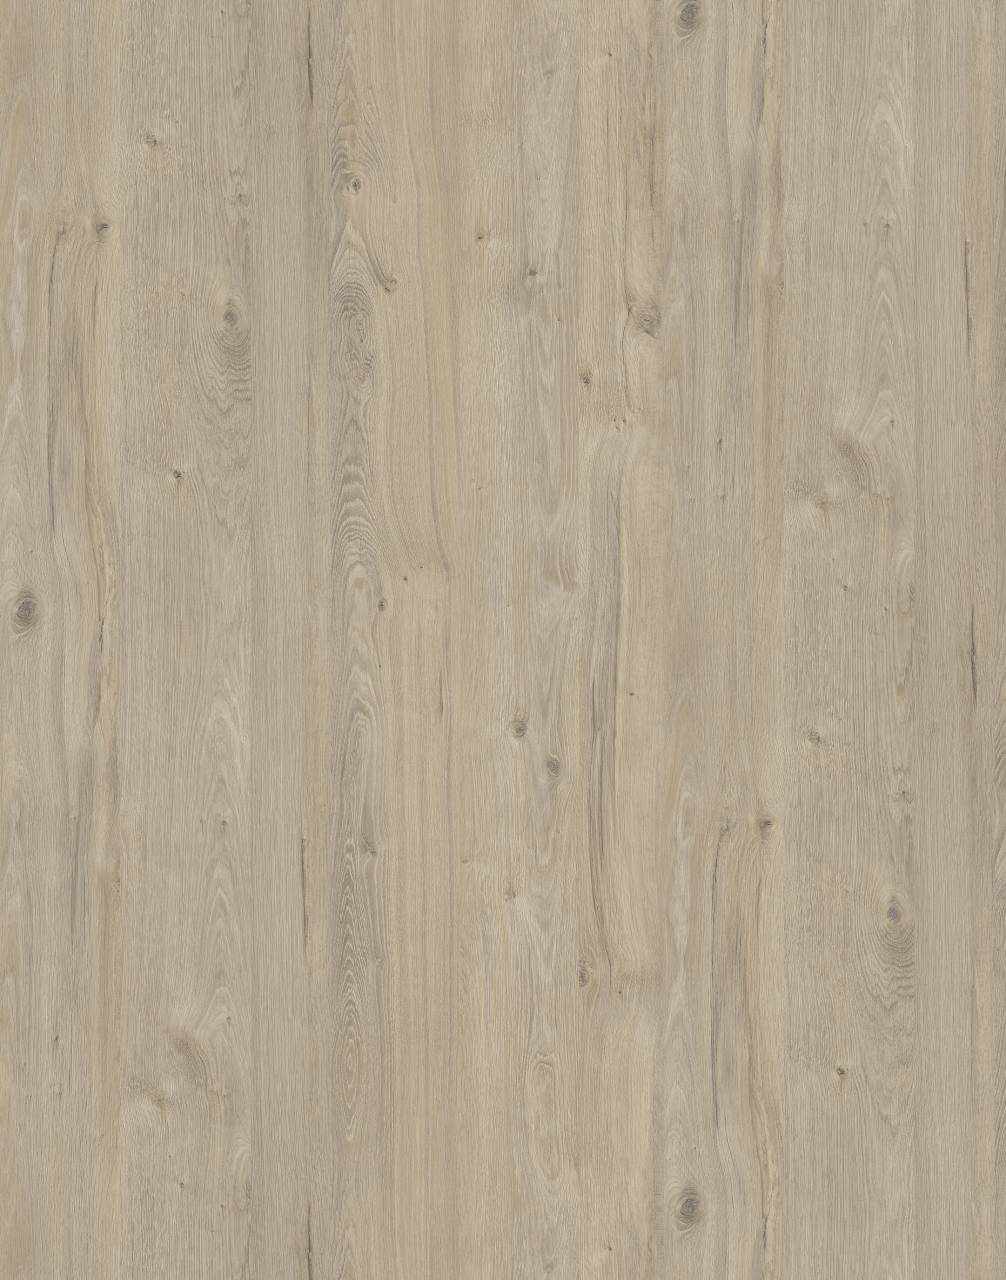 Satin Coastland Oak PW HPL with textured surface and light brown tones for a sophisticated and elegant look.